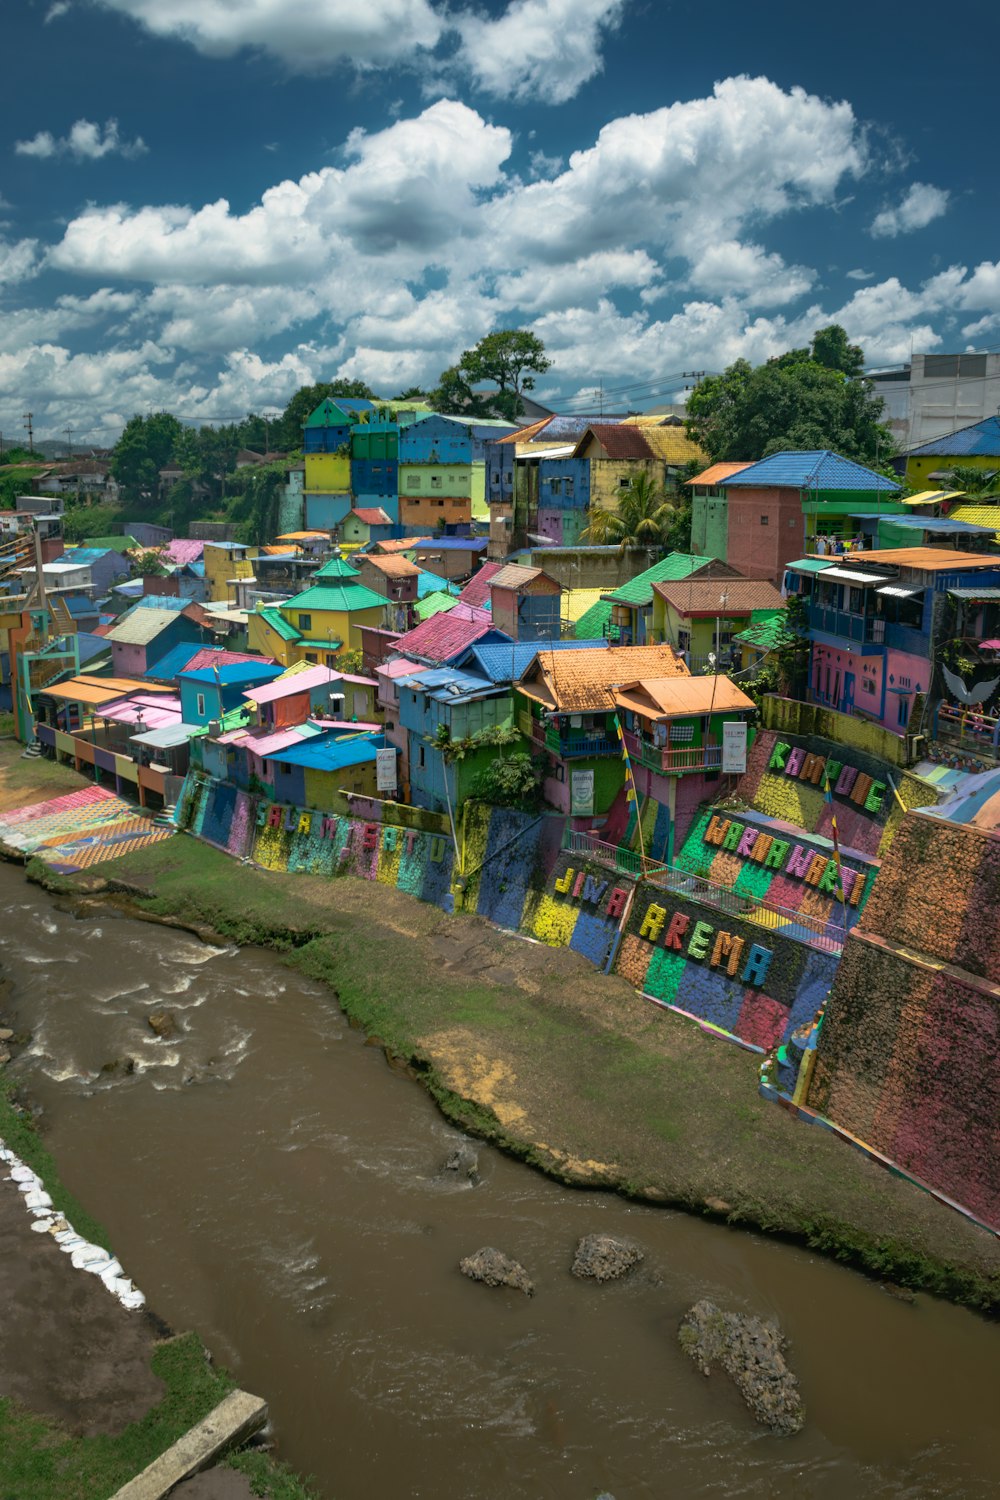 a river runs through a city with colorful buildings